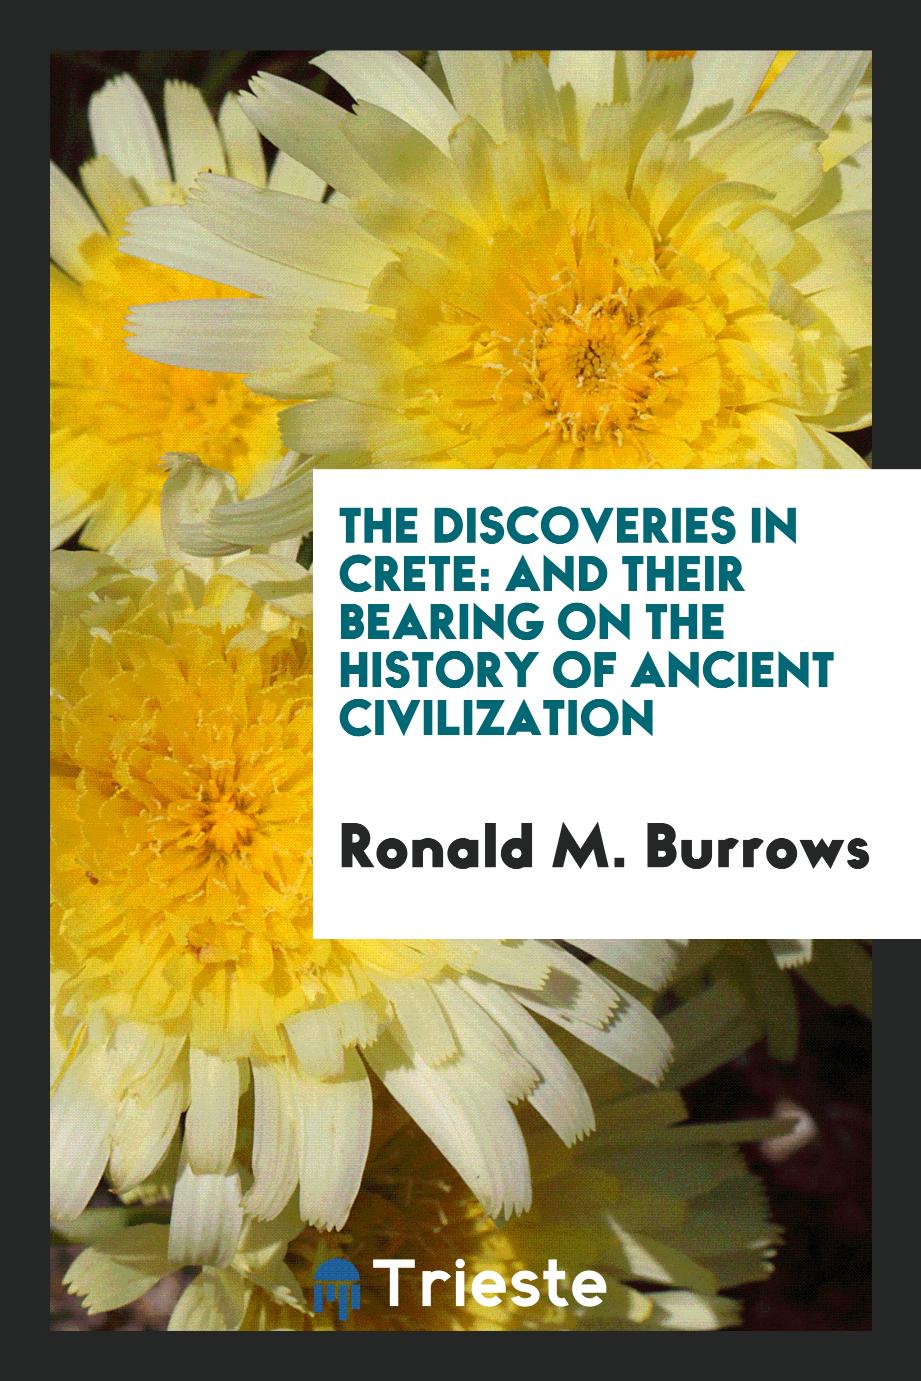 The discoveries in Crete: and their bearing on the history of ancient civilization